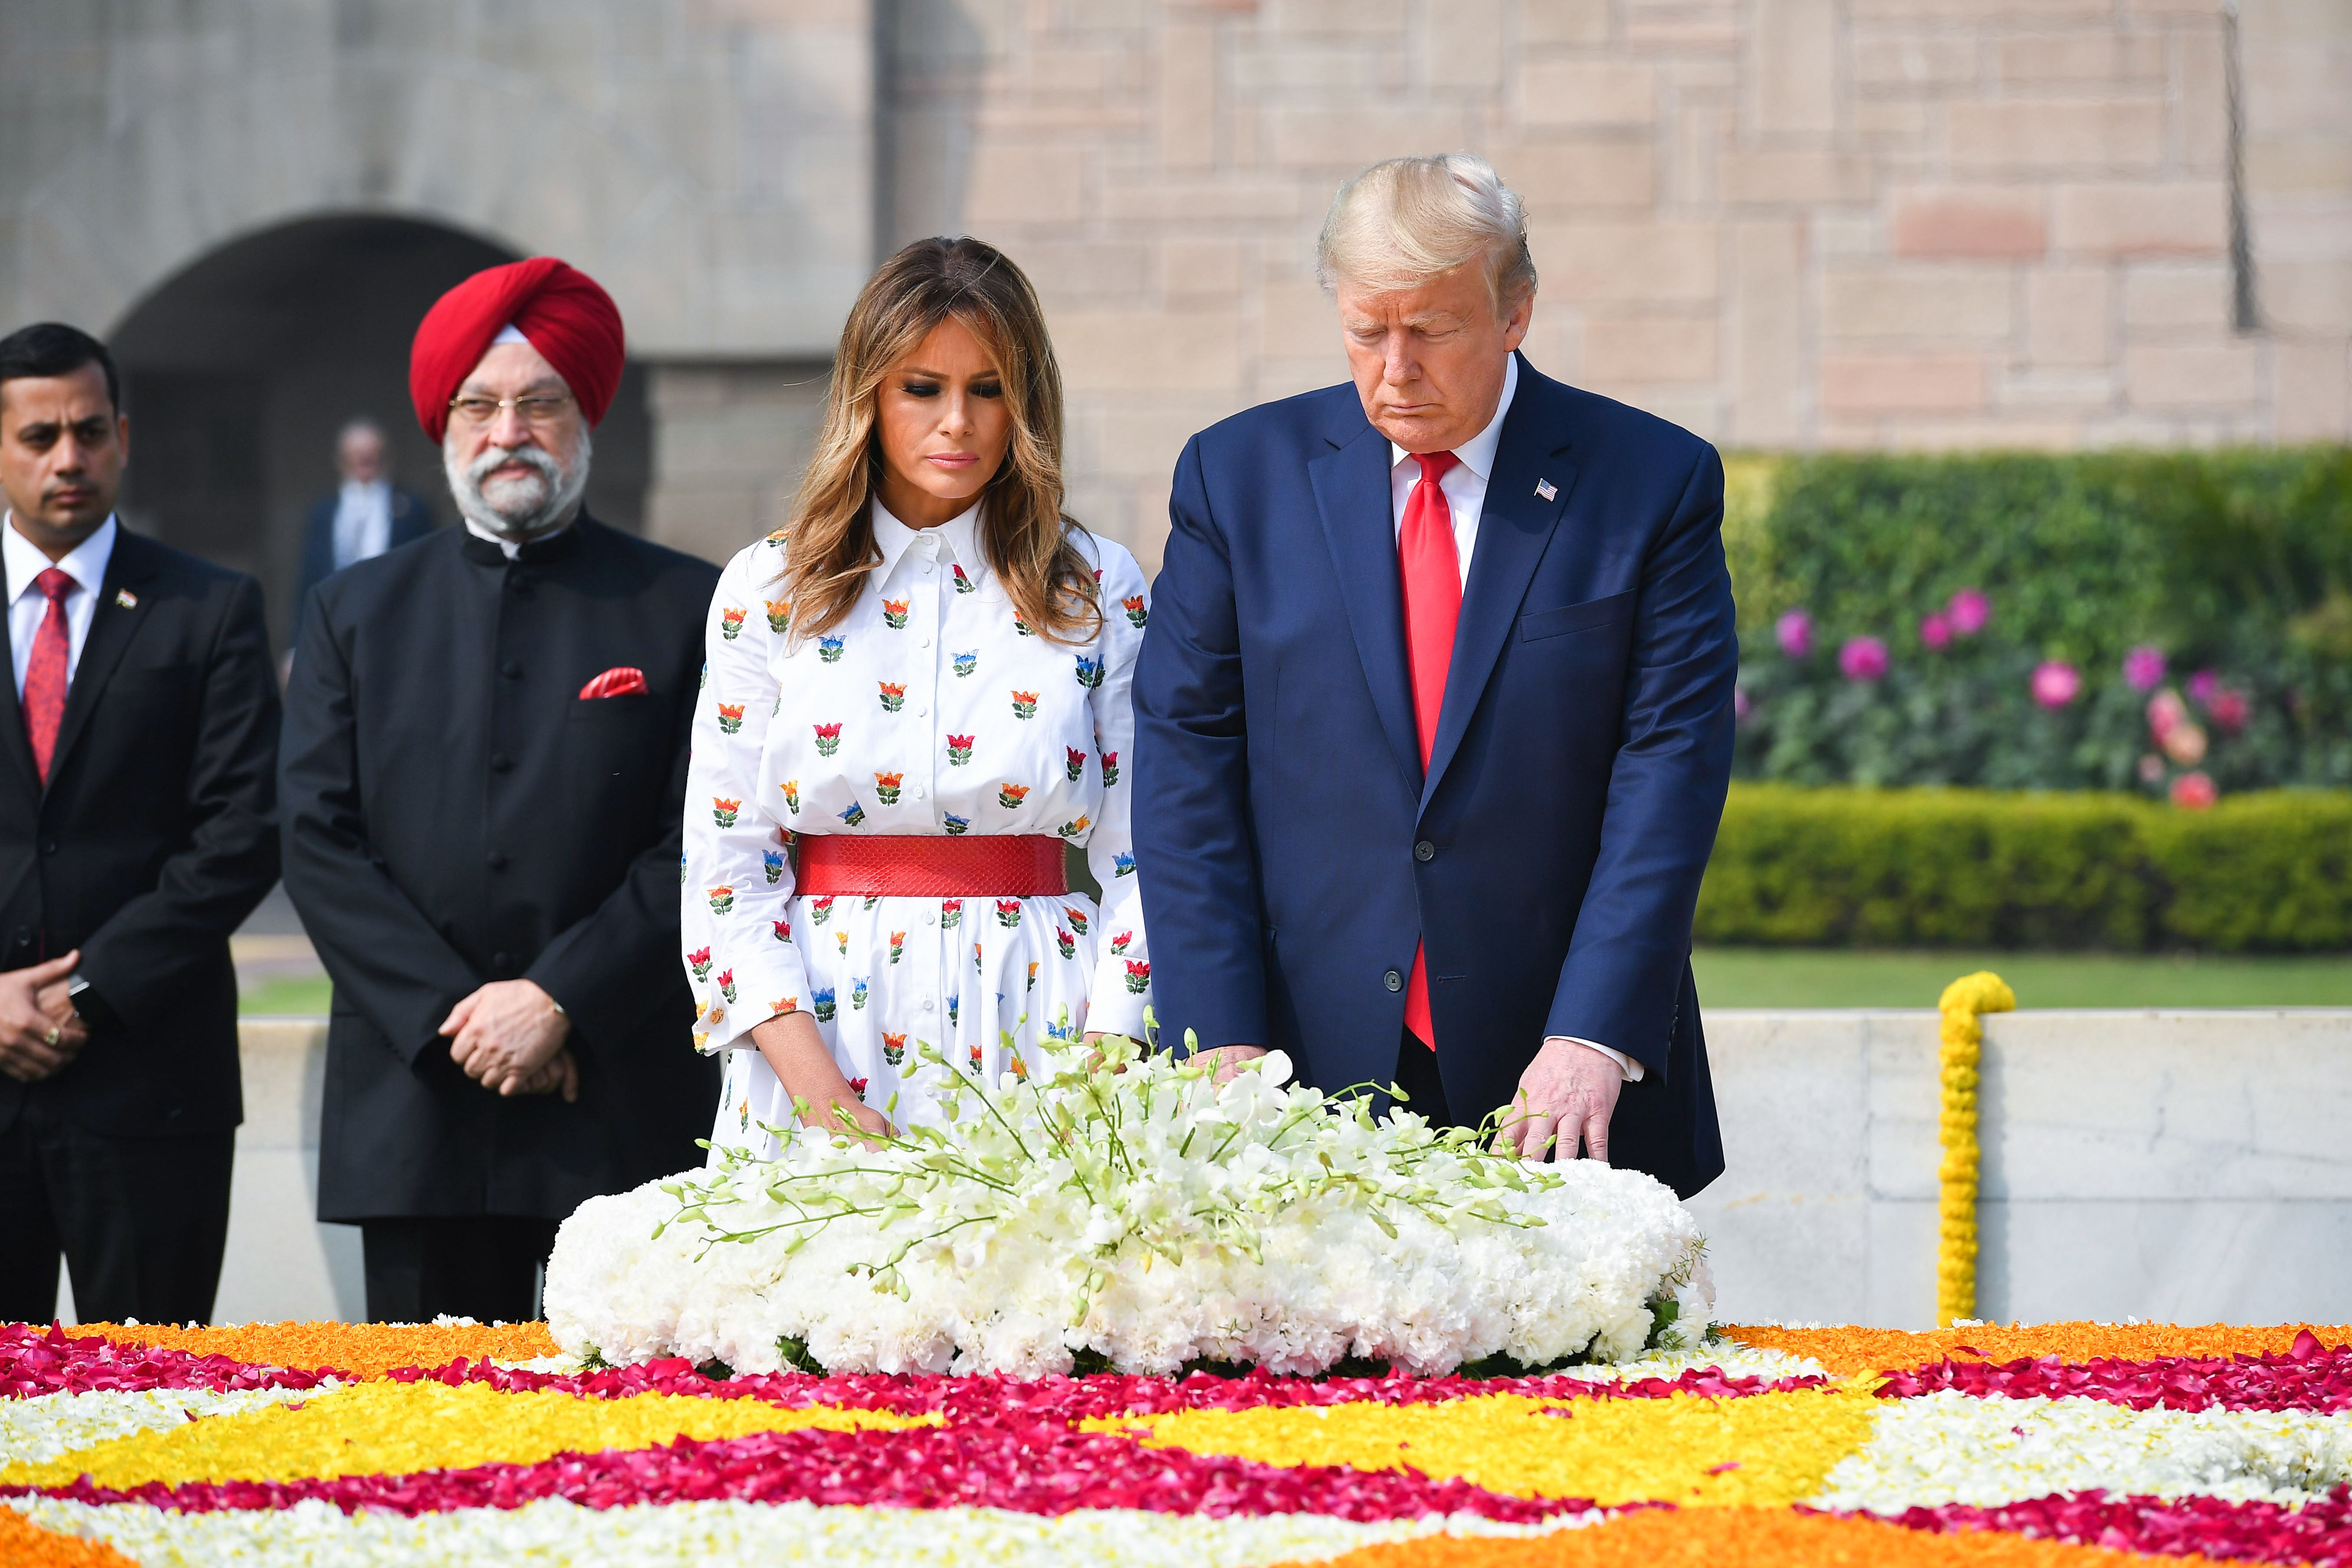 US President Donald Trump and First Lady Melania Trump lay a wreath to pay their tribute at Raj Ghat, the memorial for Indian independence icon Mahatma Gandhi, in New Delhi on February 25, 2020. (Photo by MANDEL NGAN/AFP via Getty Images)